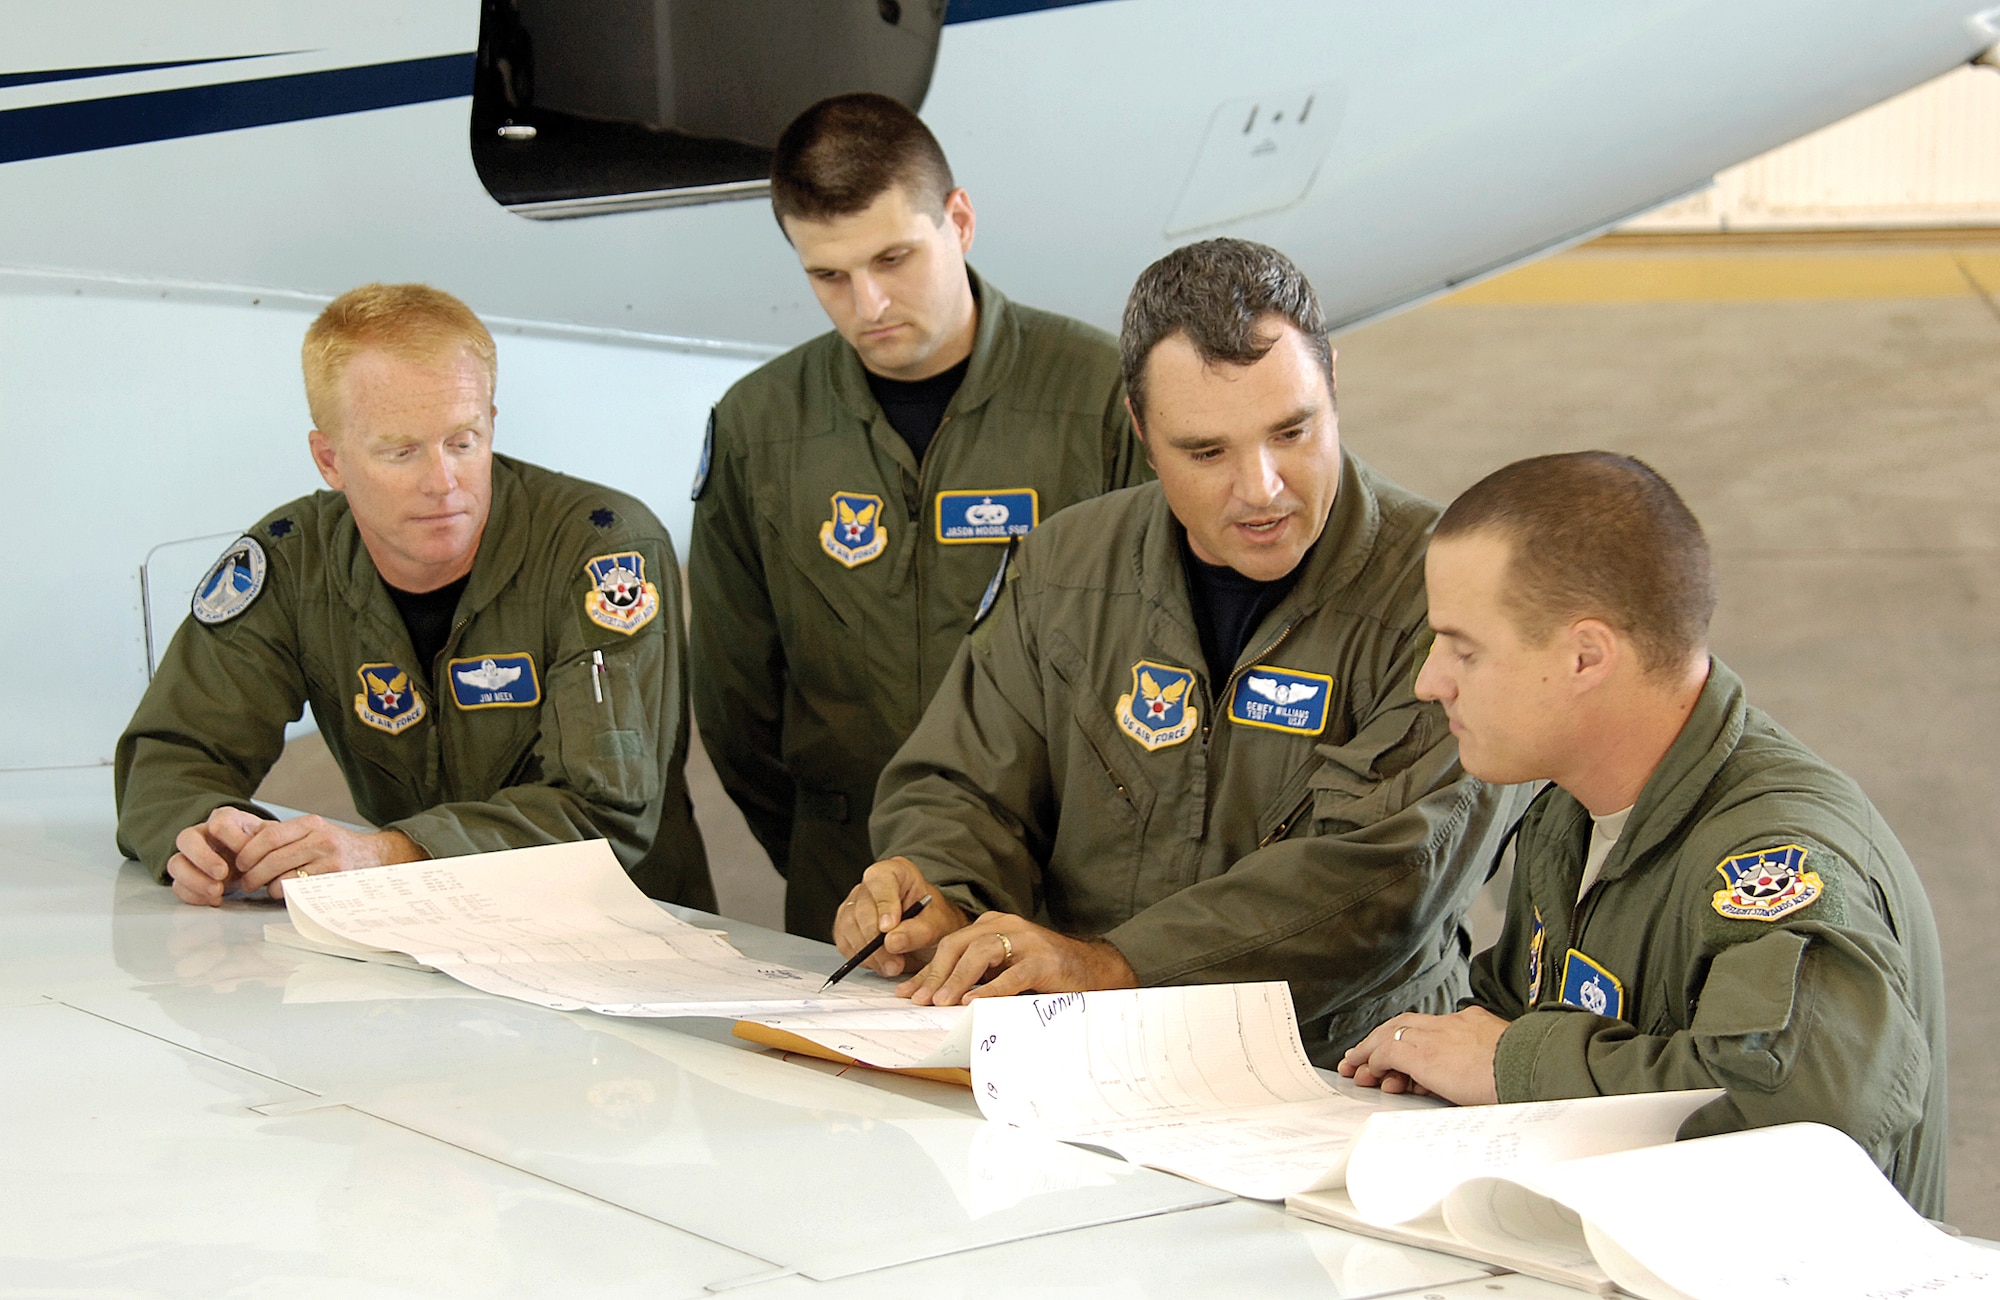 Stationed at the Mike Monroney Aeronautical Center in Oklahoma City, Air Force Flight Standards Agency aircrews fly approaches all over the world to certify that runways and equipment are safe and working properly. Reviewing information spread out on the wing of their specially equipped Challenger aircraft are (from left) Lt. Col. Jim Meek, flight inspection pilot; Staff Sgt. Jason Moore, mission specialist trainee; Tech. Sgt. Dewey Williams, mission specialist instructor; and Tech. Sgt. Peter Nichiporuk, mission specialist trainee. (U.S. Air Force photo/Margo Wright)